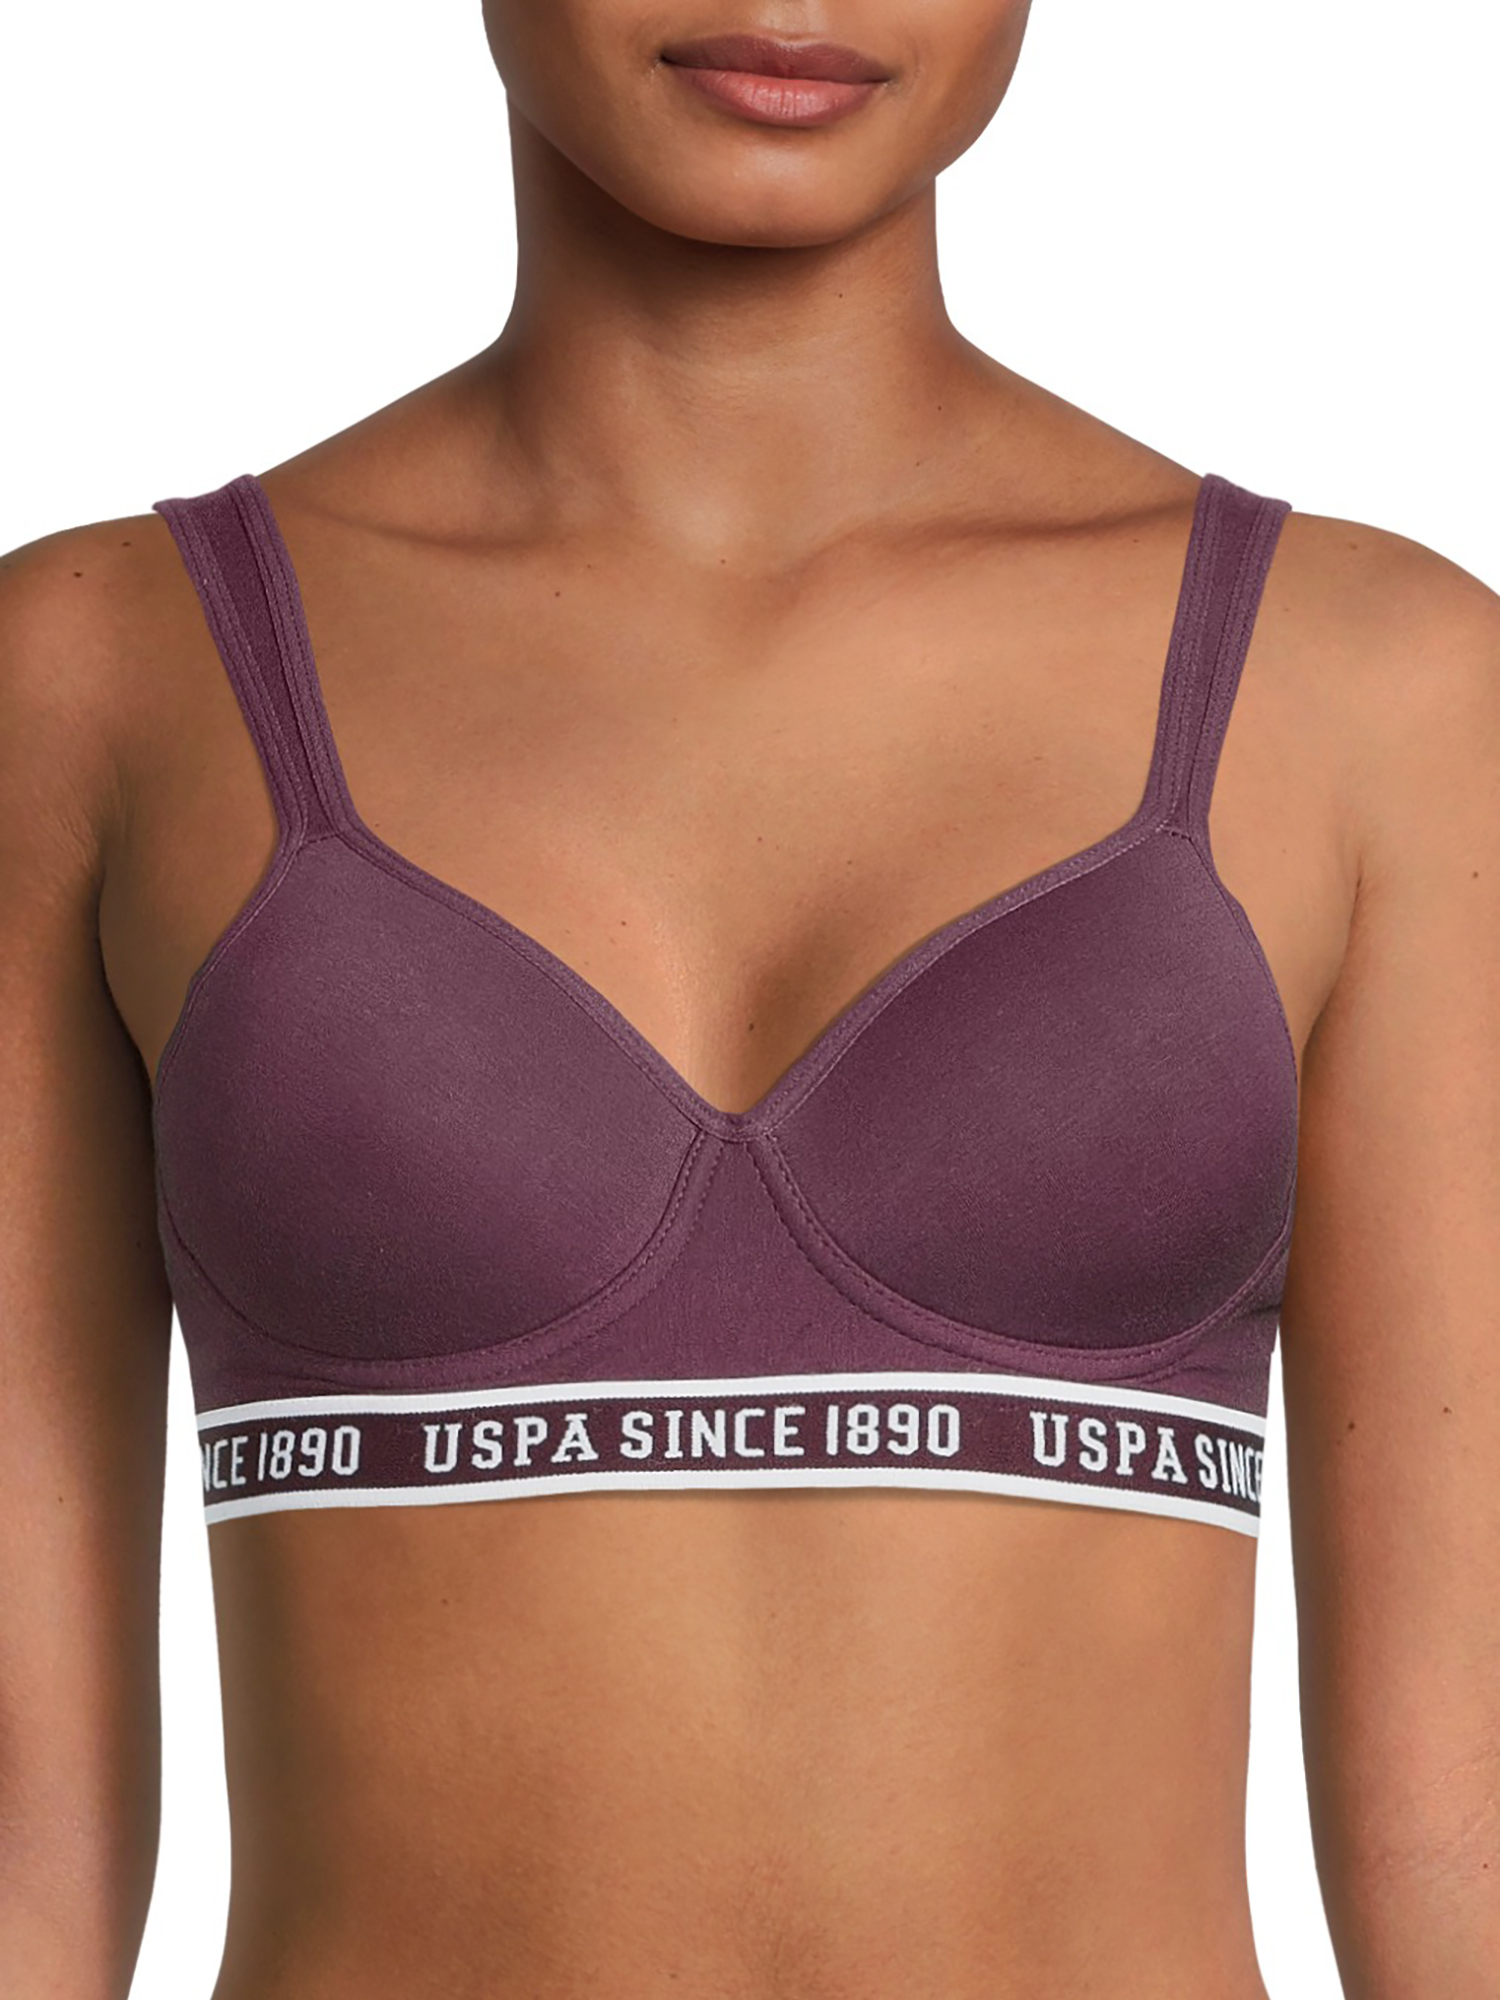 U.S. Polo Assn. Women's Tag-Free Sports Bra Set, 3-Pack - image 2 of 4